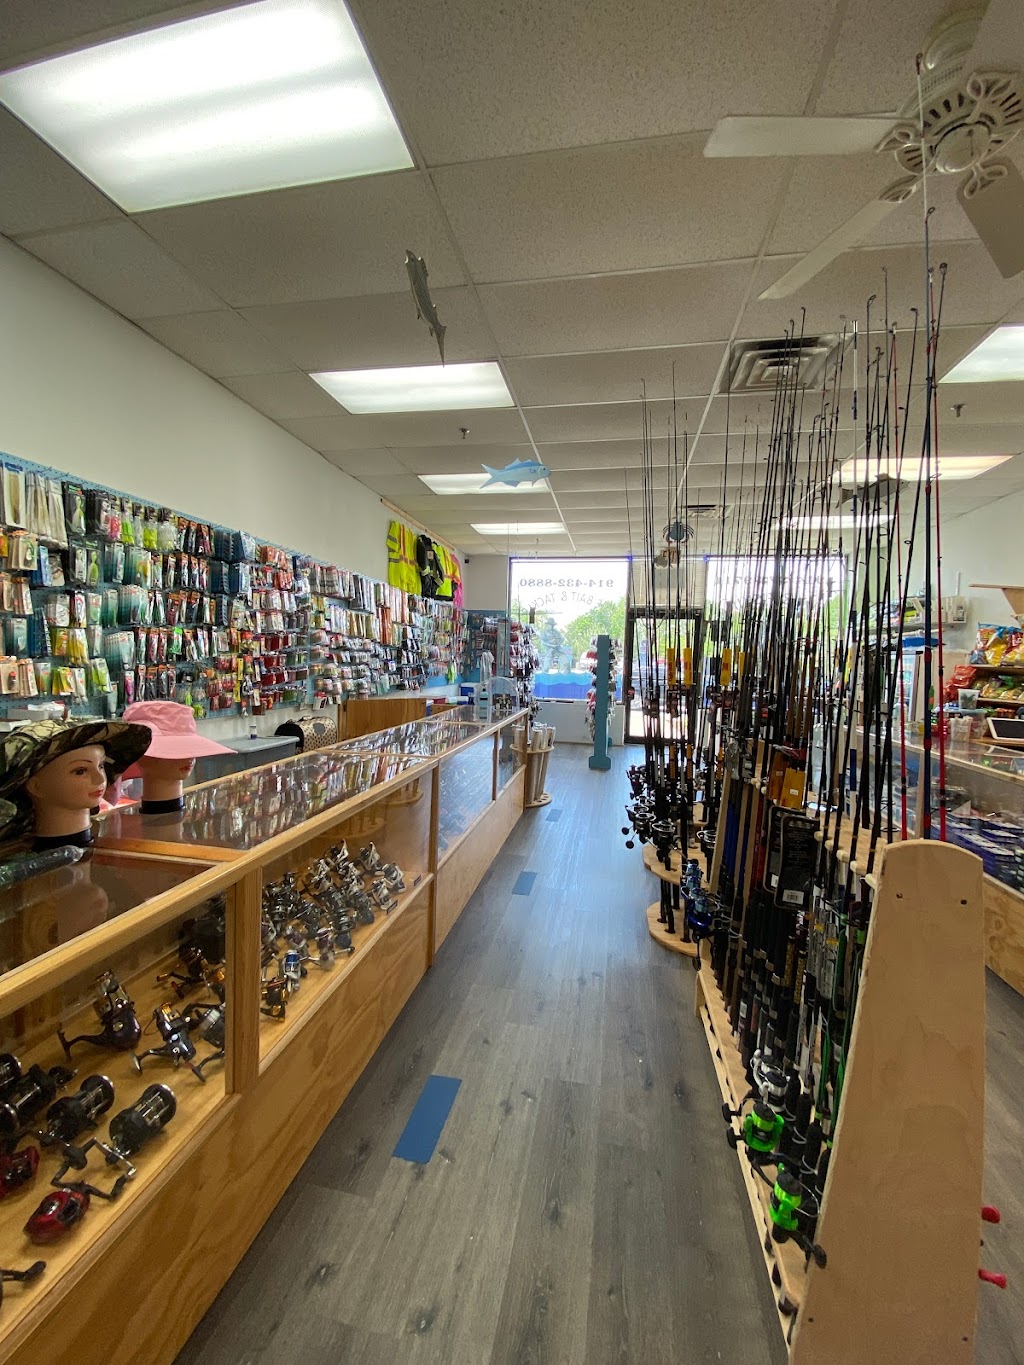 Buy and Fishing supplies | 238 N Highland Ave, Ossining, NY 10562 | Phone: (914) 432-8880